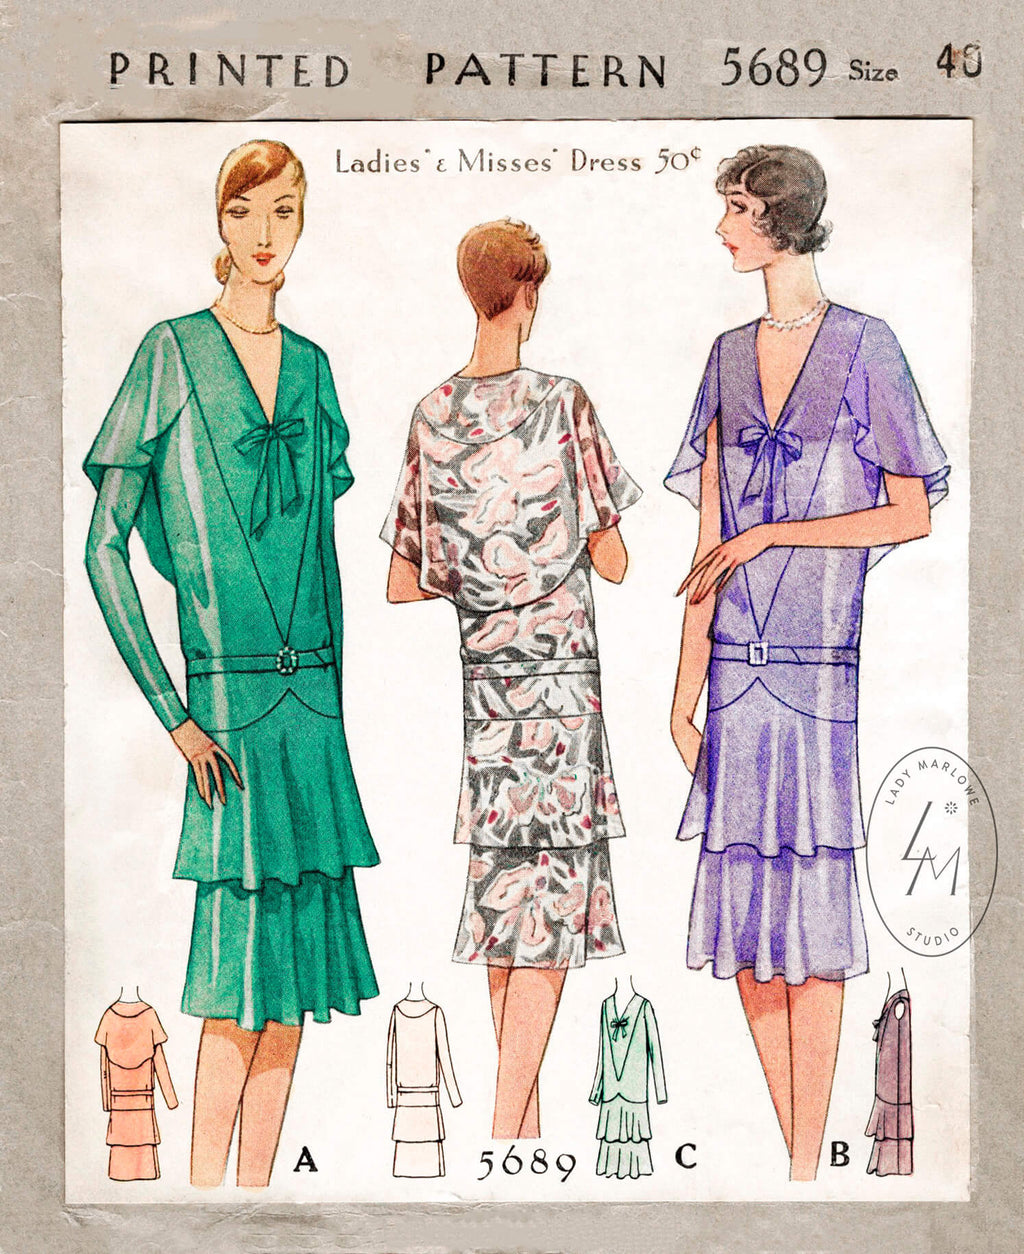 McCall 5689 vintage sewing pattern 1920s 20s reproduction flapper day or evening dress